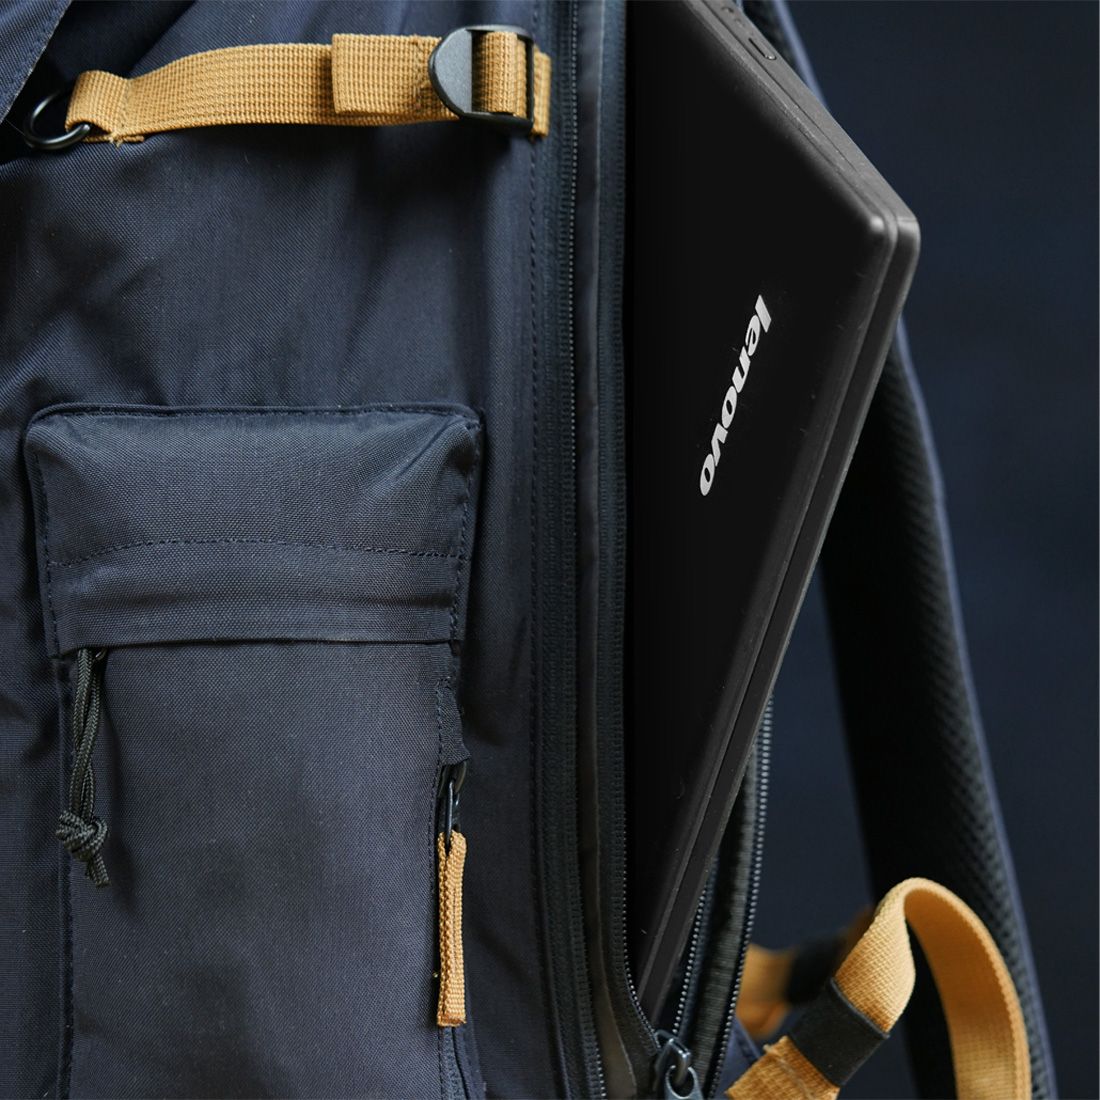 THE PACKER - MULTI-UNIVERSE BACKPACK